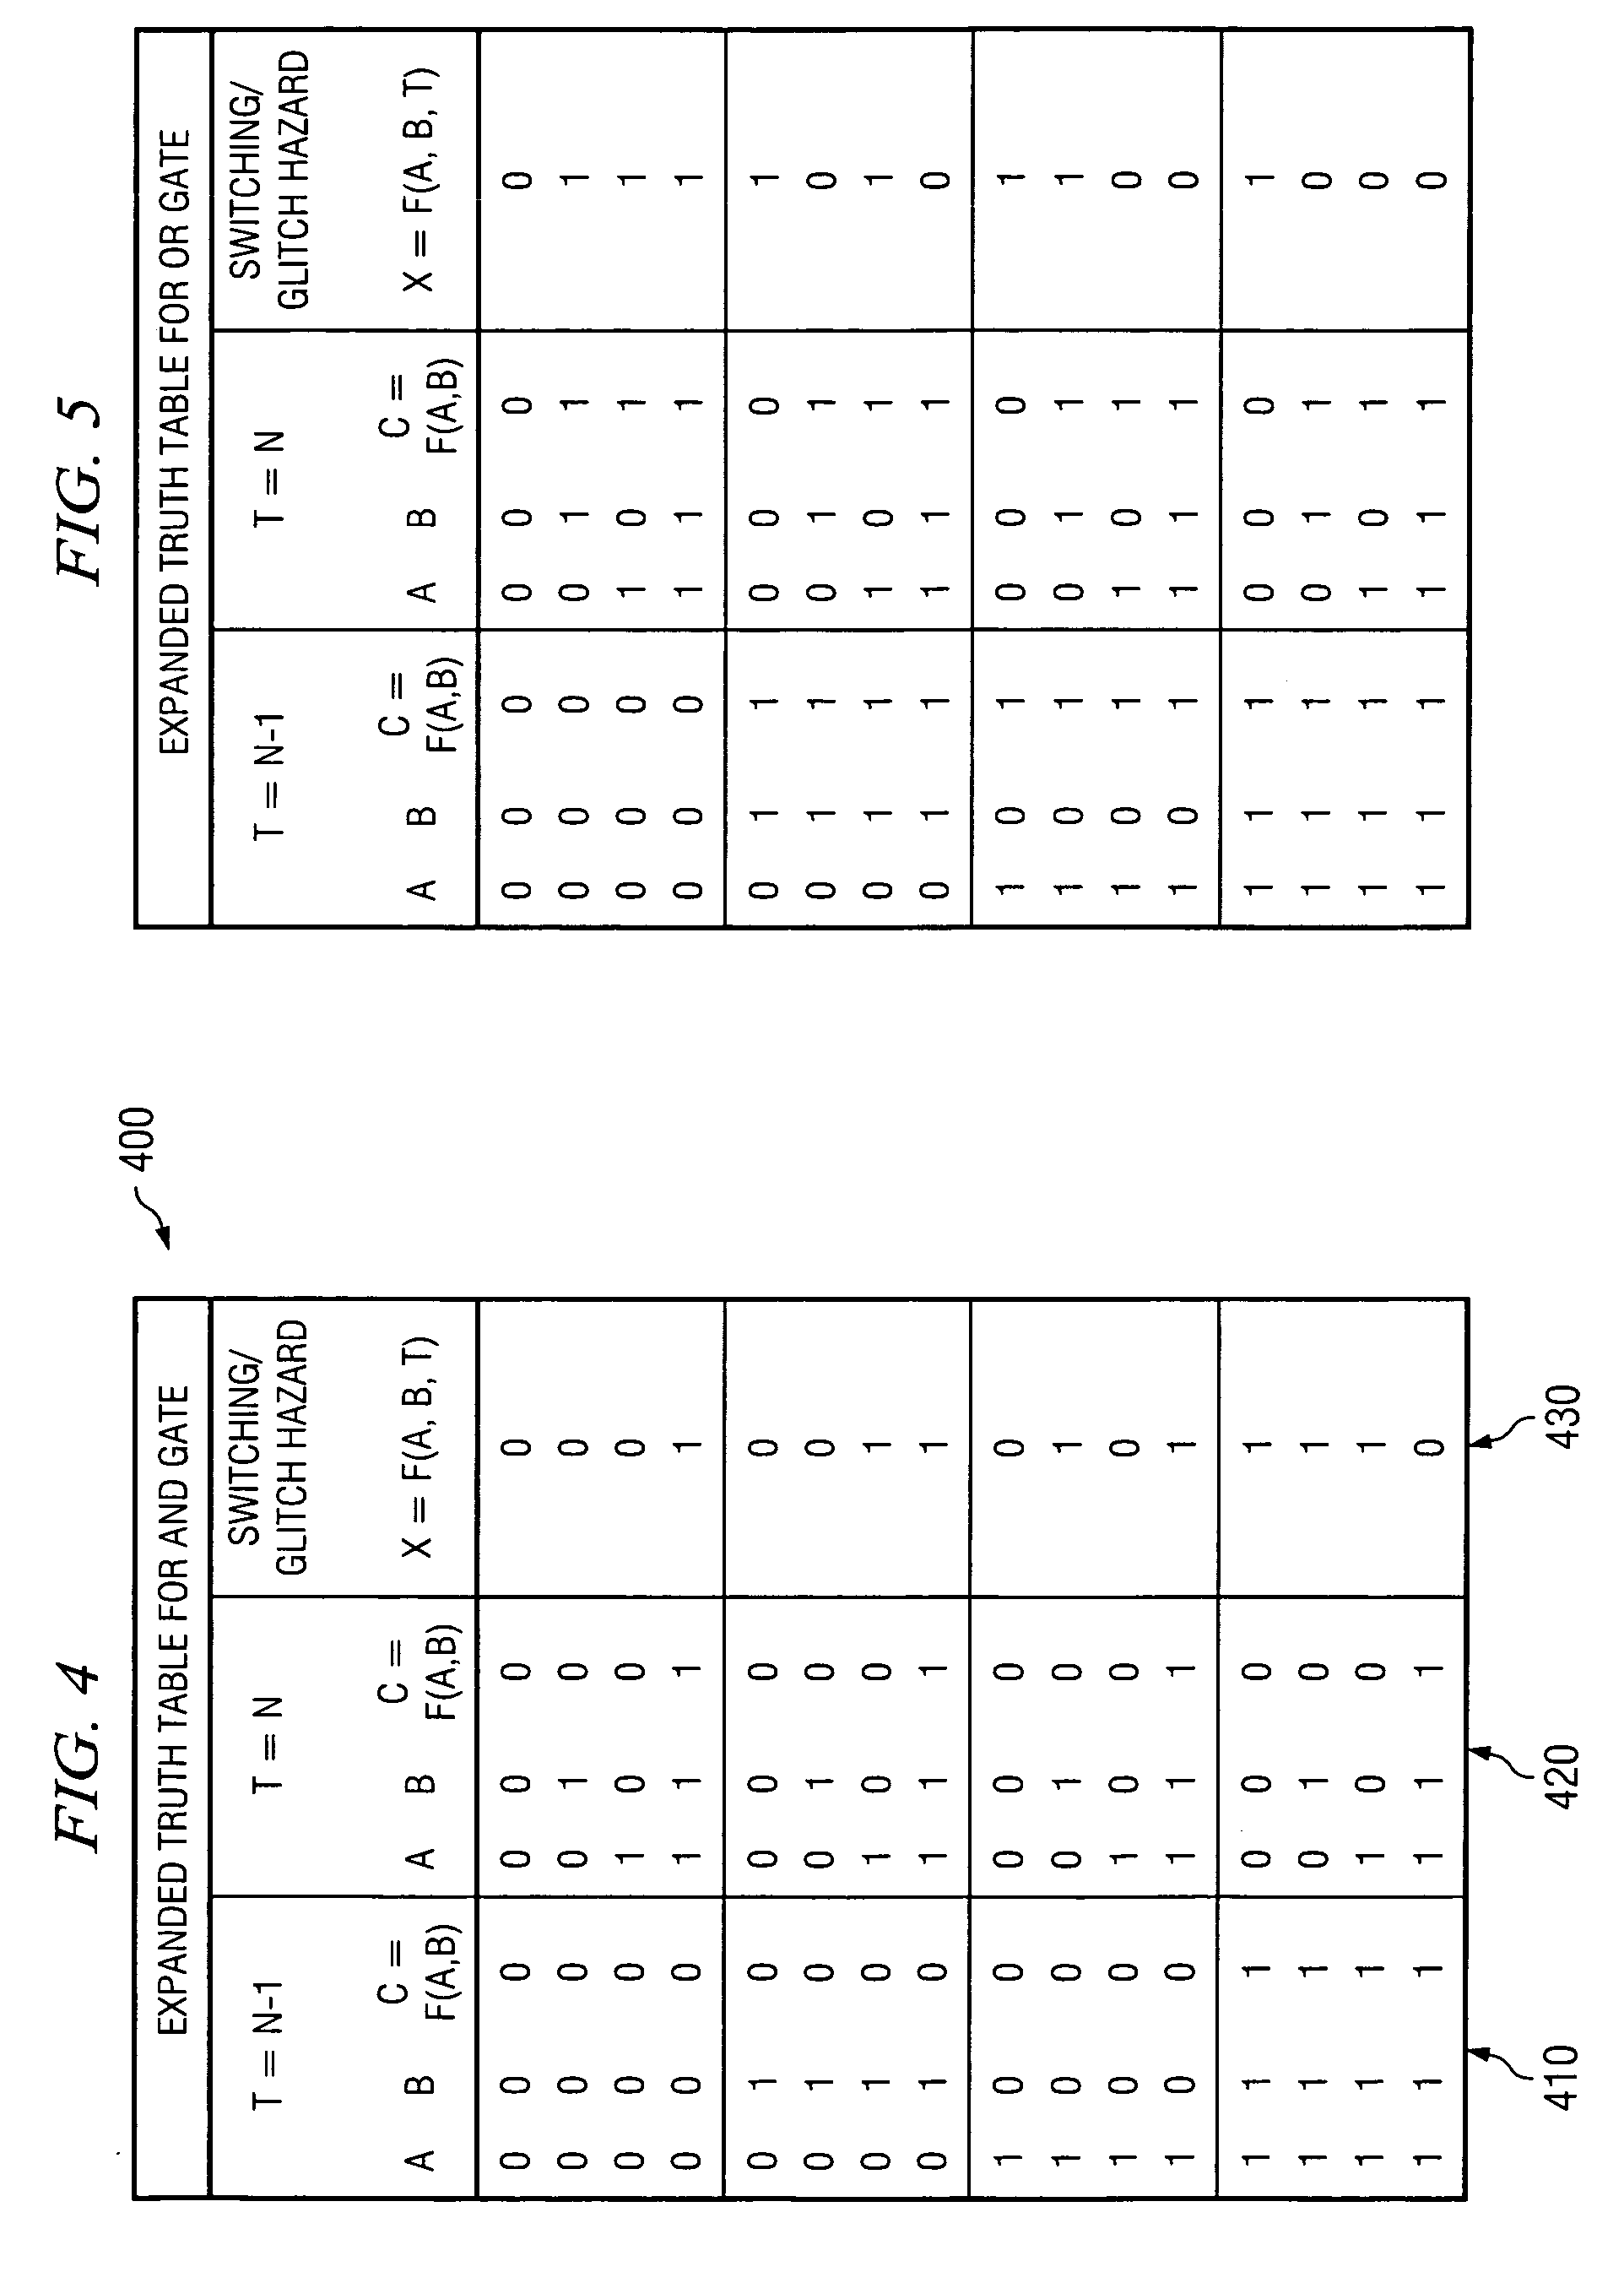 System and method for accurately modeling an asynchronous interface using expanded logic elements